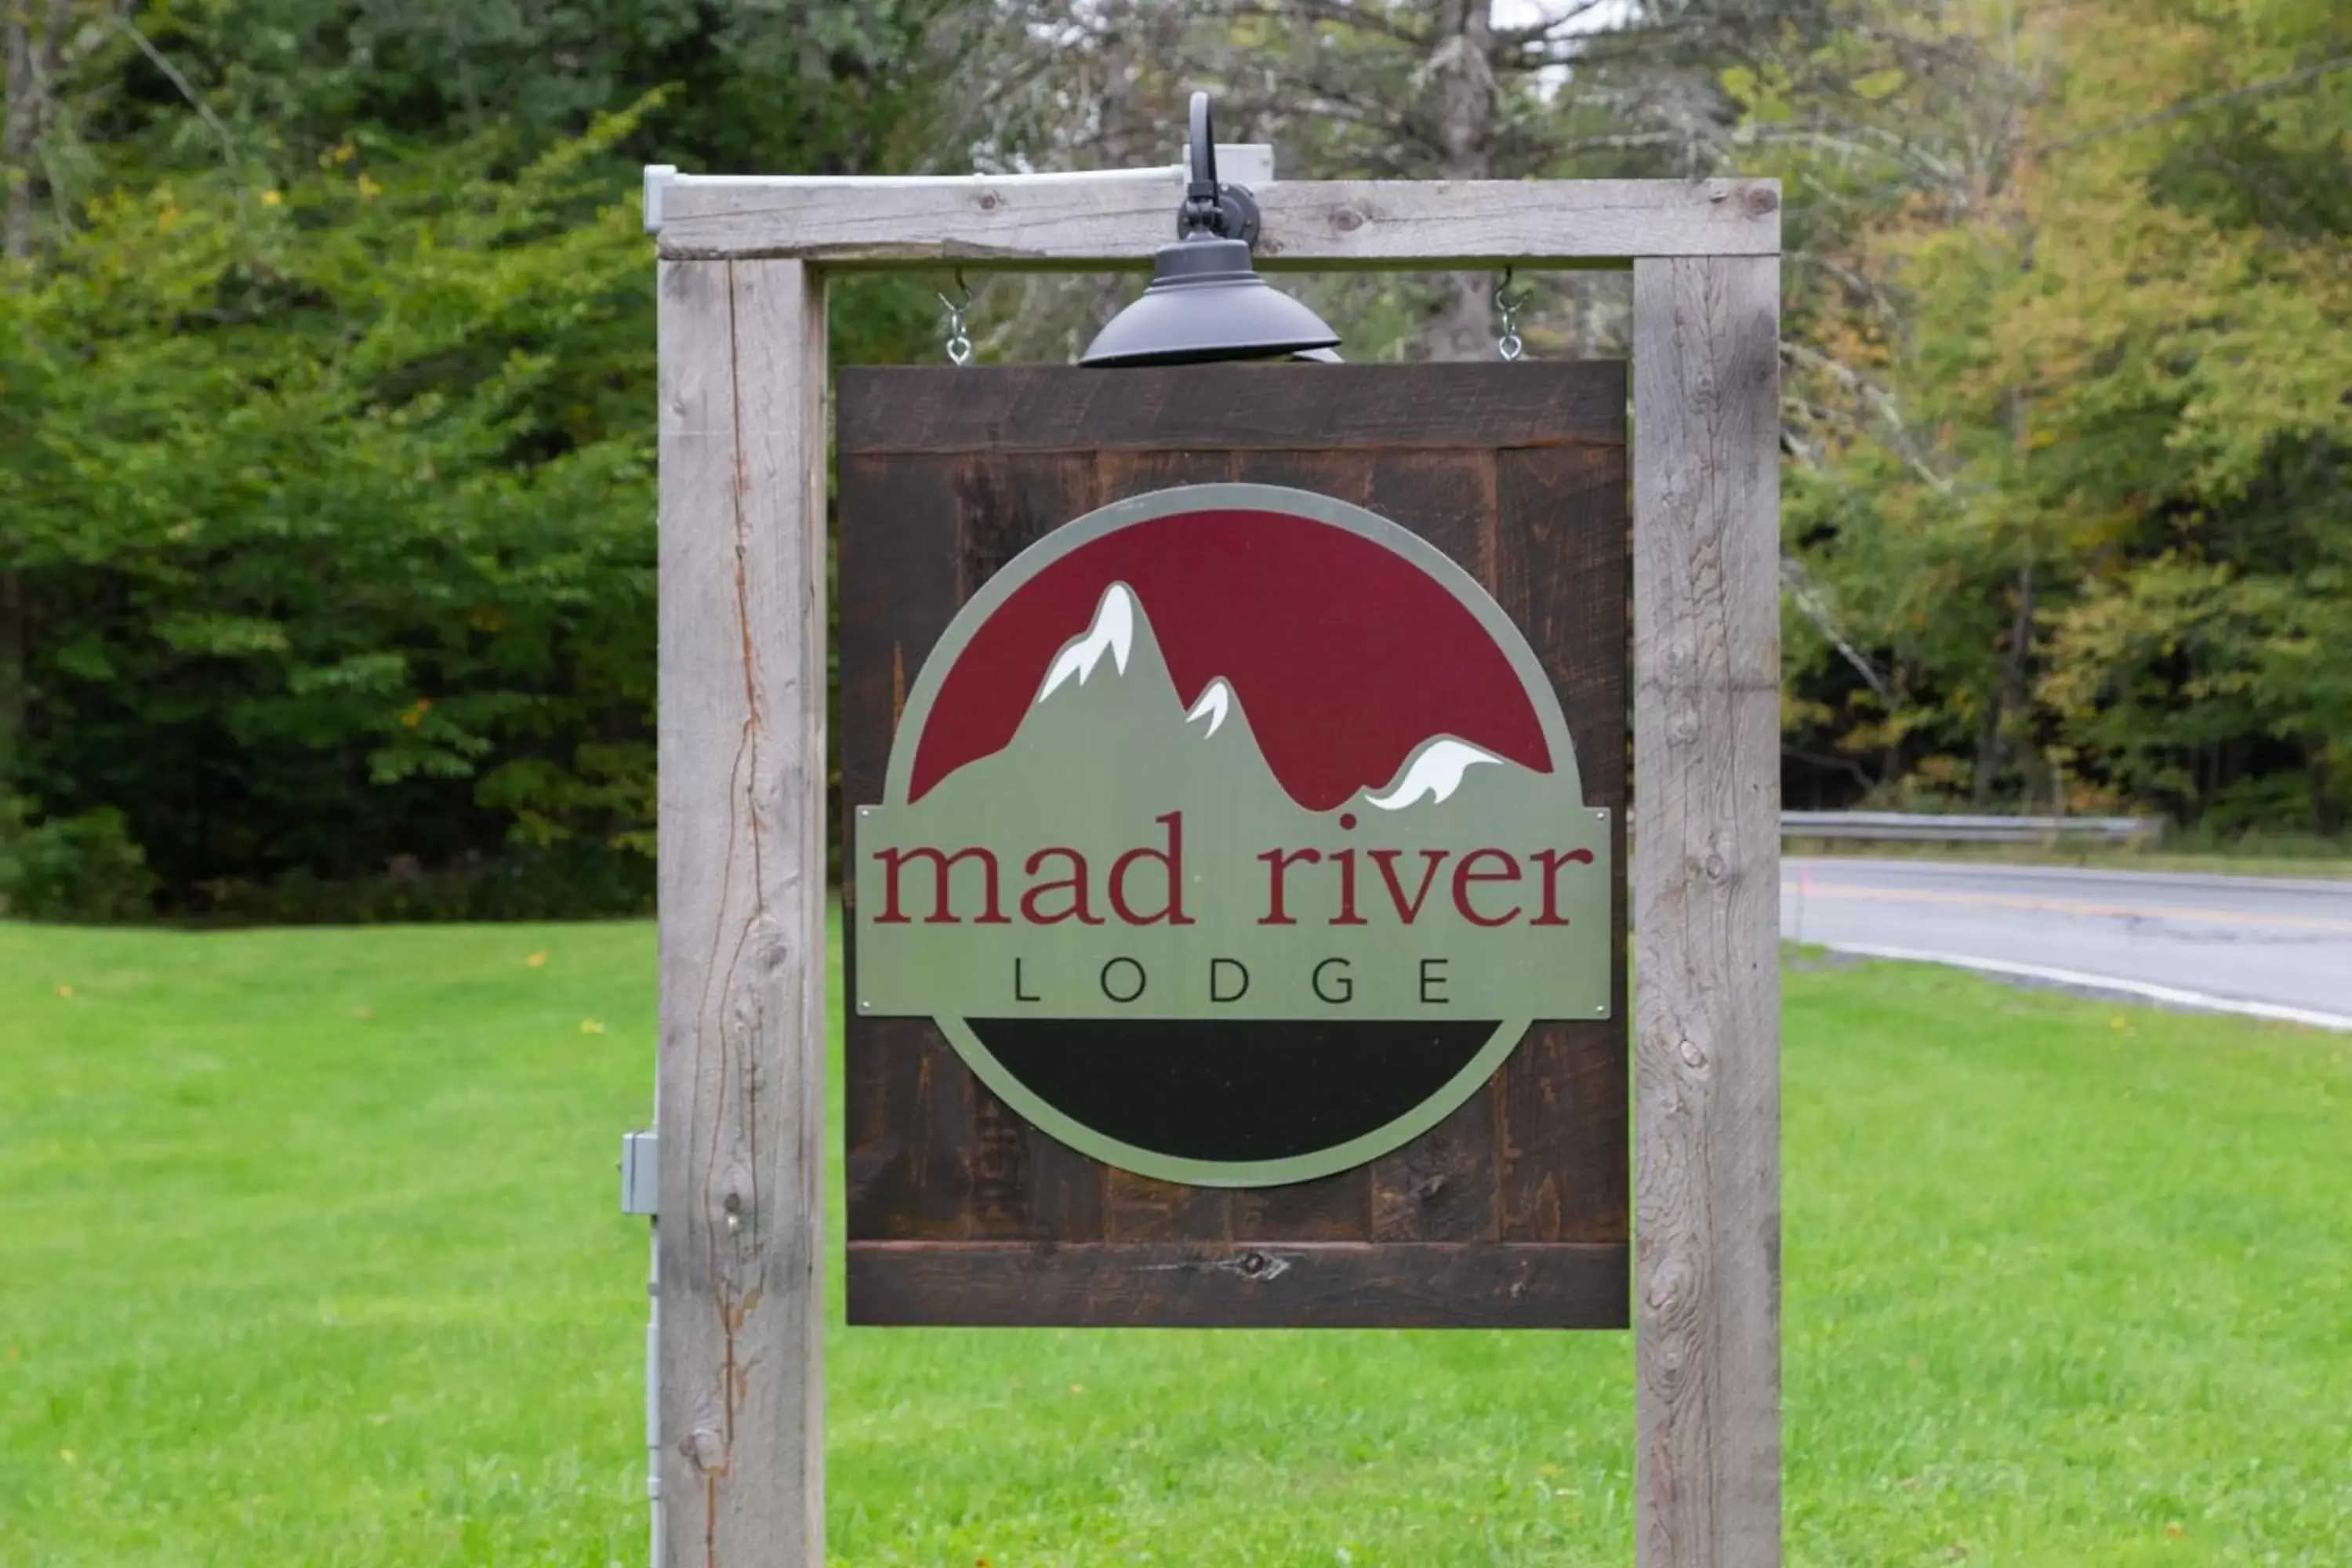 Property logo or sign in Mad River Lodge